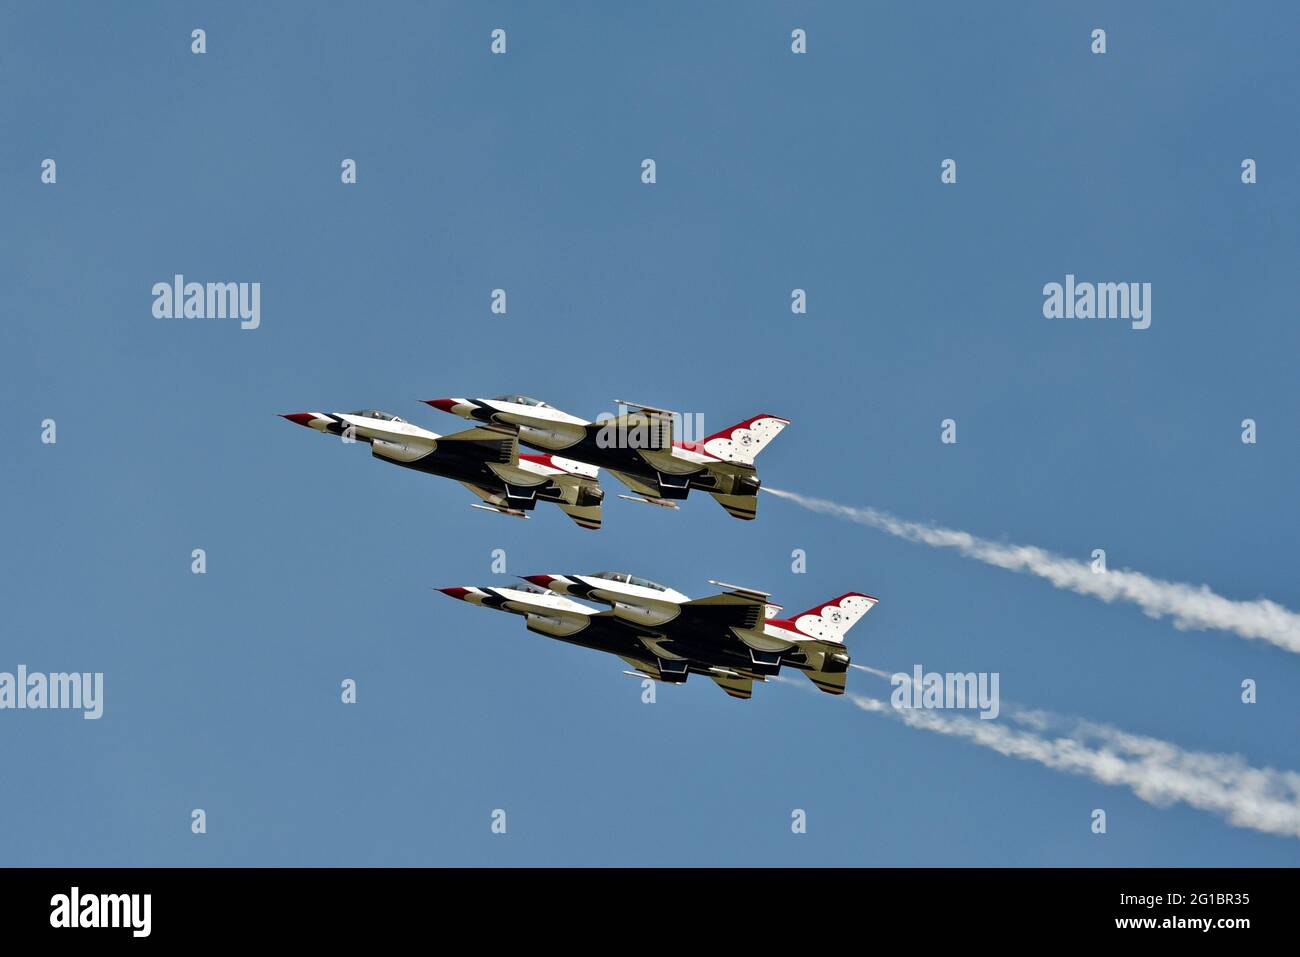 US Air Force Thunderbirds, F-16 fighter jets, air demonstration squadron, in flight formation at the EAA Fly-In (AirVenture), Oshkosh, Wisconsin, USA Stock Photo